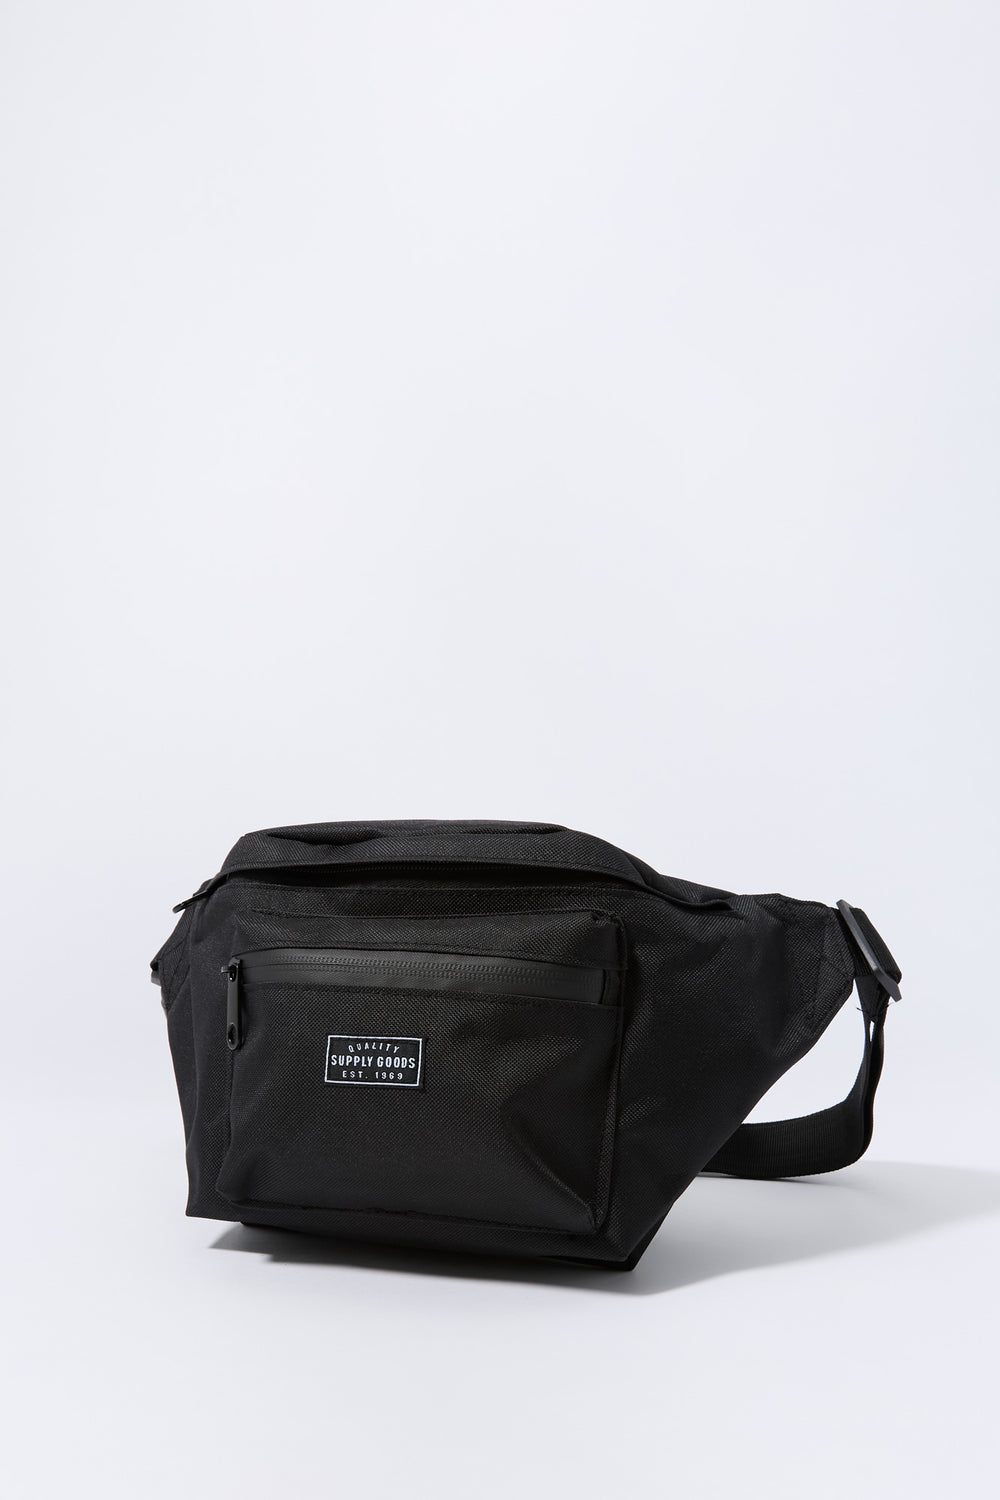 Supply Goods Patch Fanny Pack Supply Goods Patch Fanny Pack 2